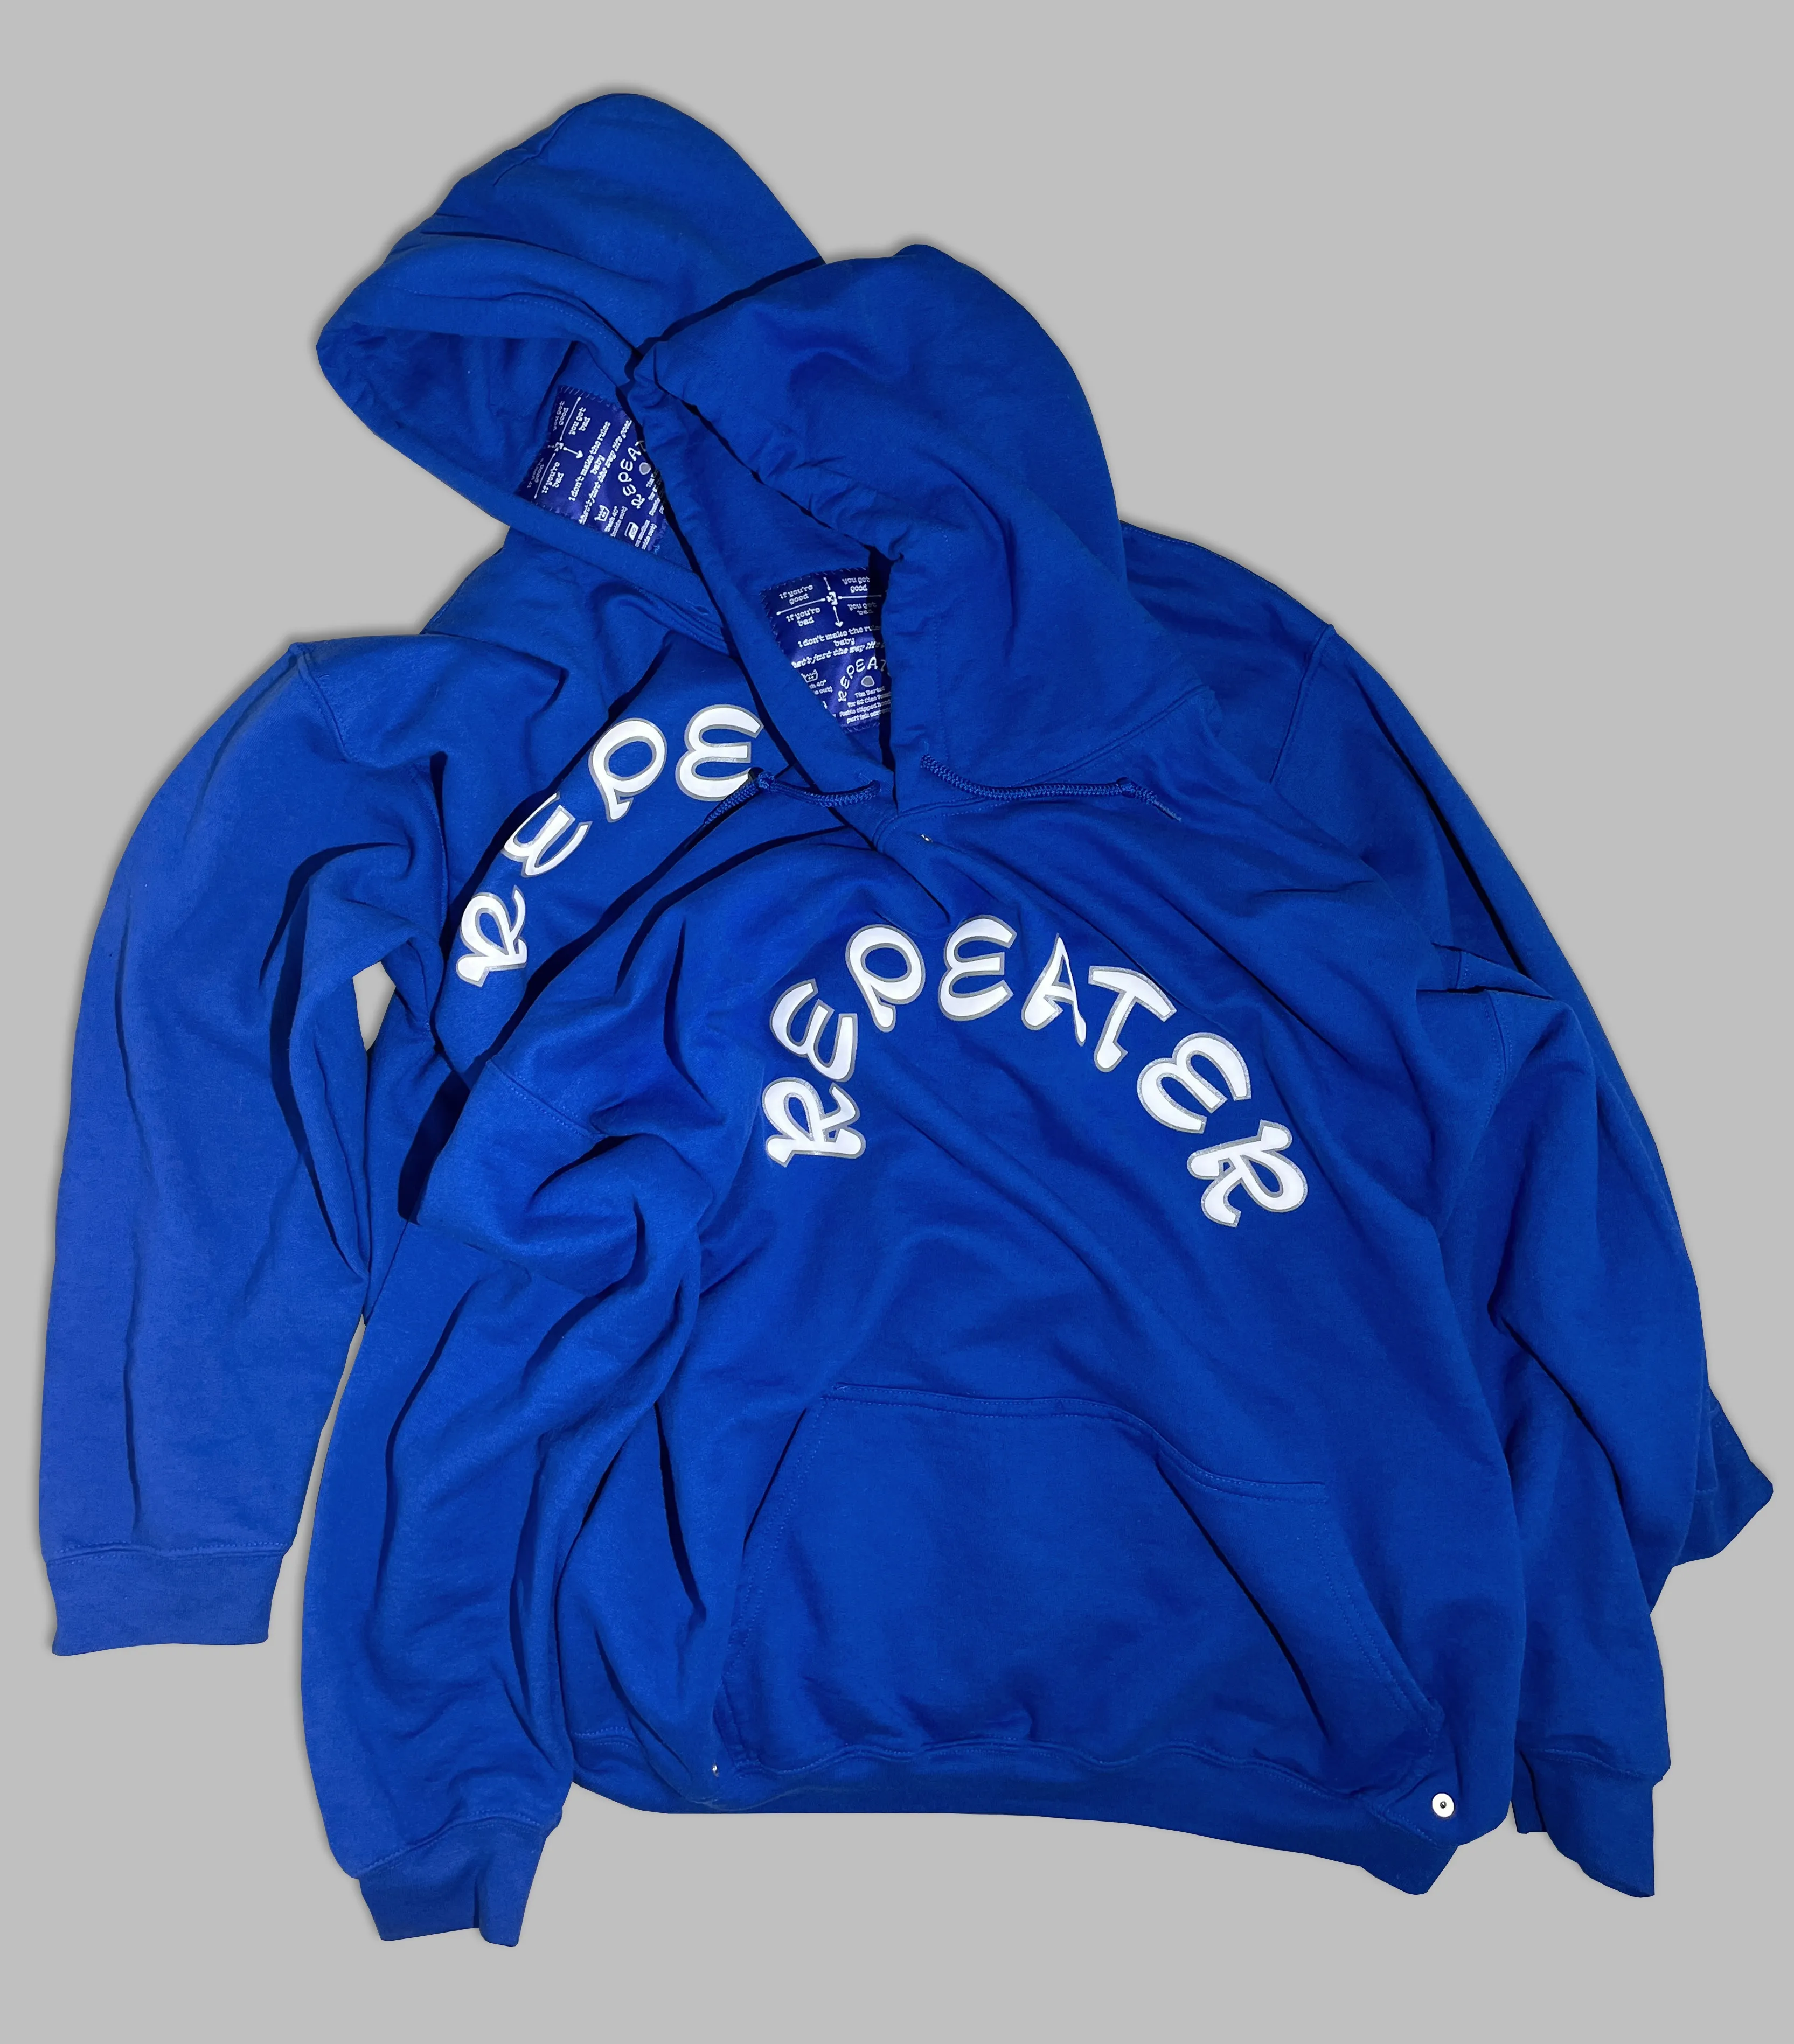 Two bloue hoodies, with the word repeater printed on the front